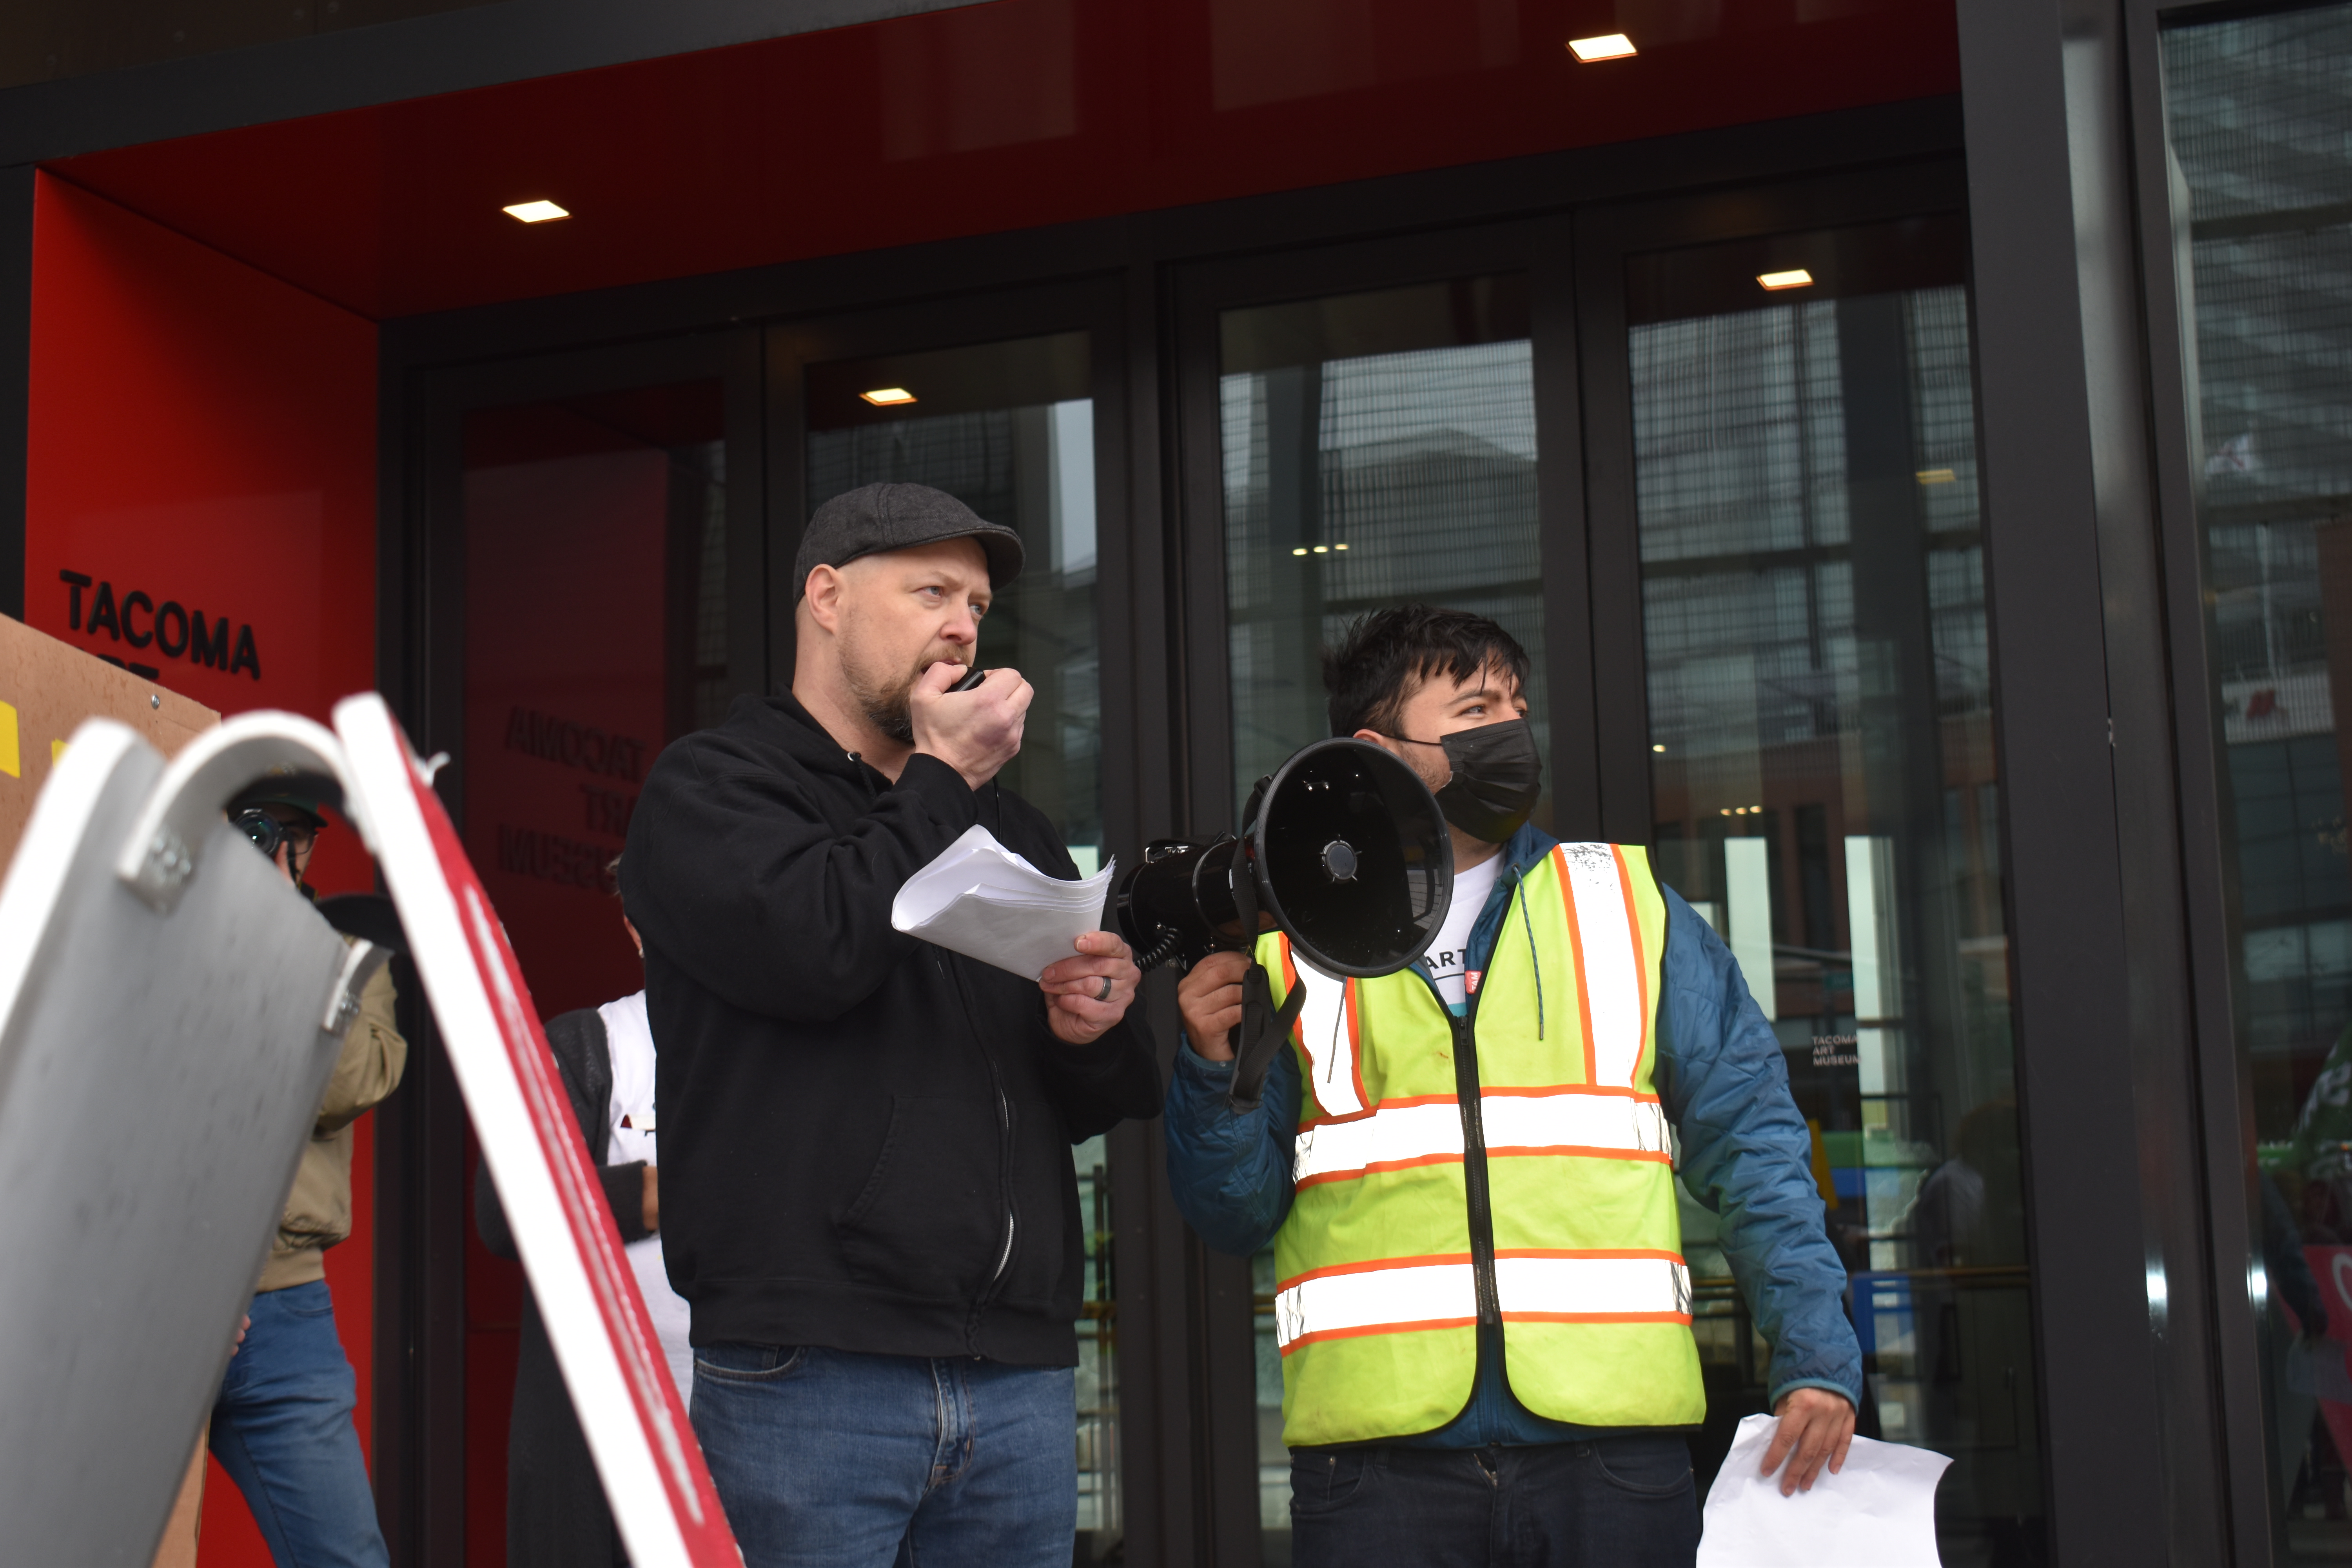 Steven Rue, lead preparer at the museum and a member of the union’s organizing committee, addressing Thursday's crowd. Photo by Lauren Gallup.